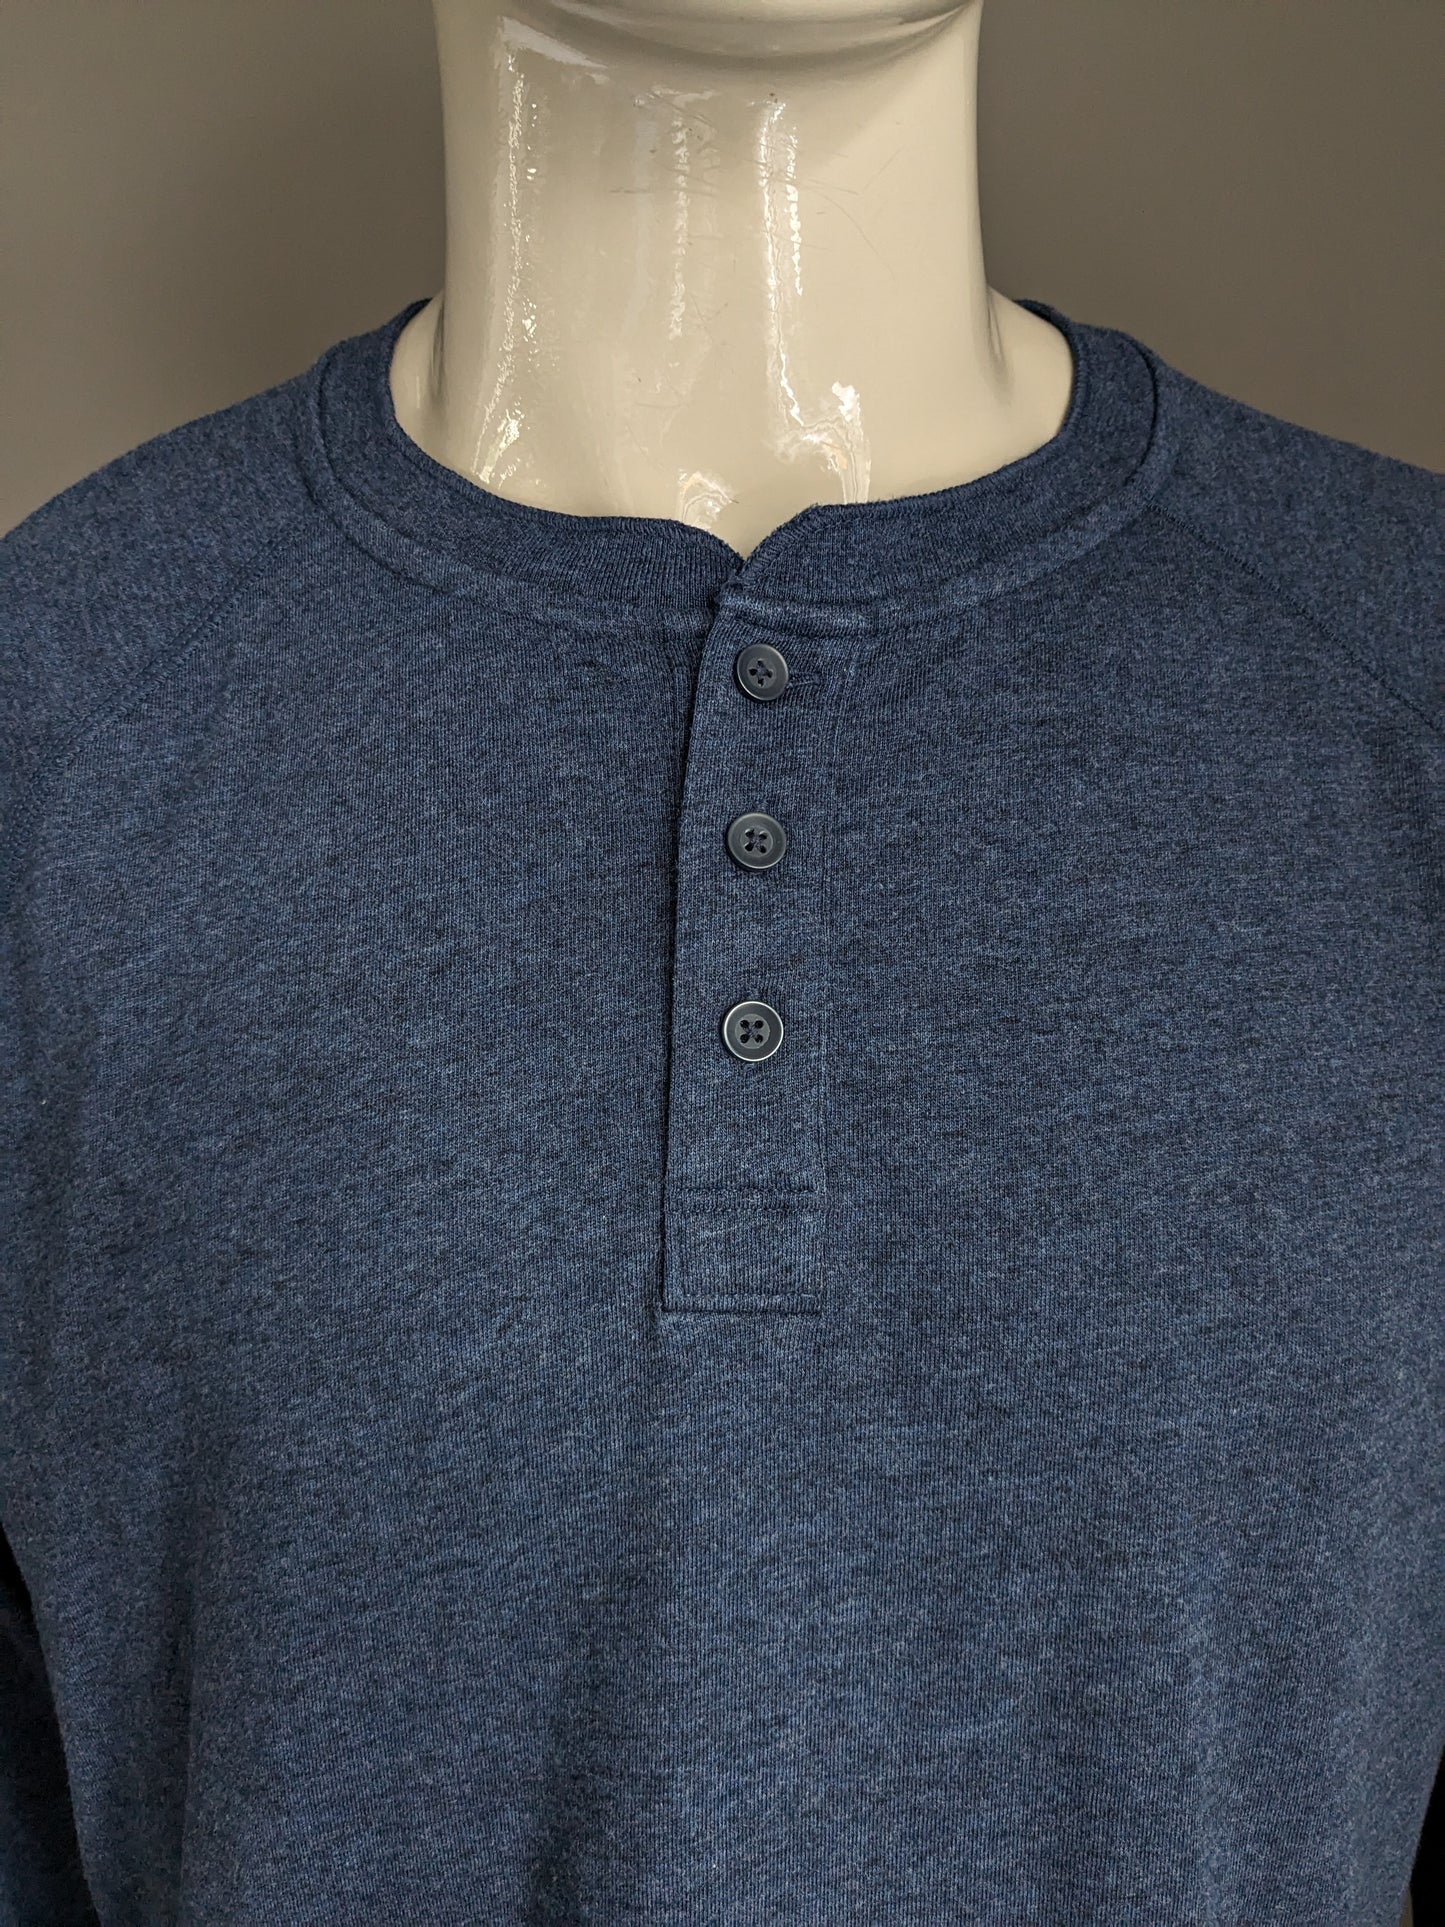 Gap Longsleeve with buttons. Blue black mixed. Size XL. Stretch.